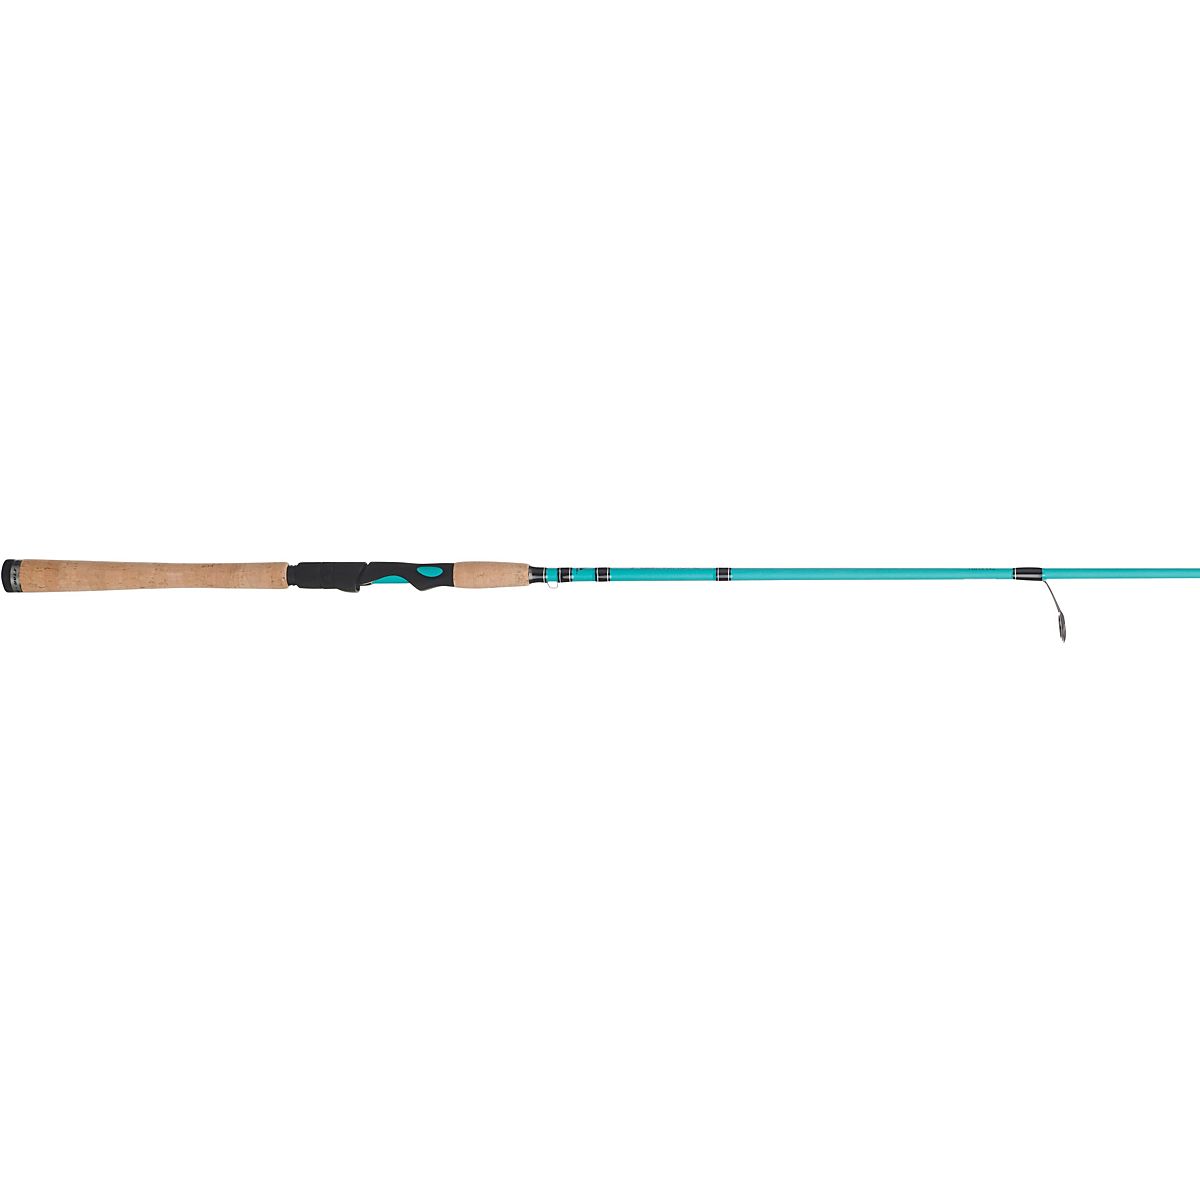 All Star Rods Inshore Saltwater Spinning Rod